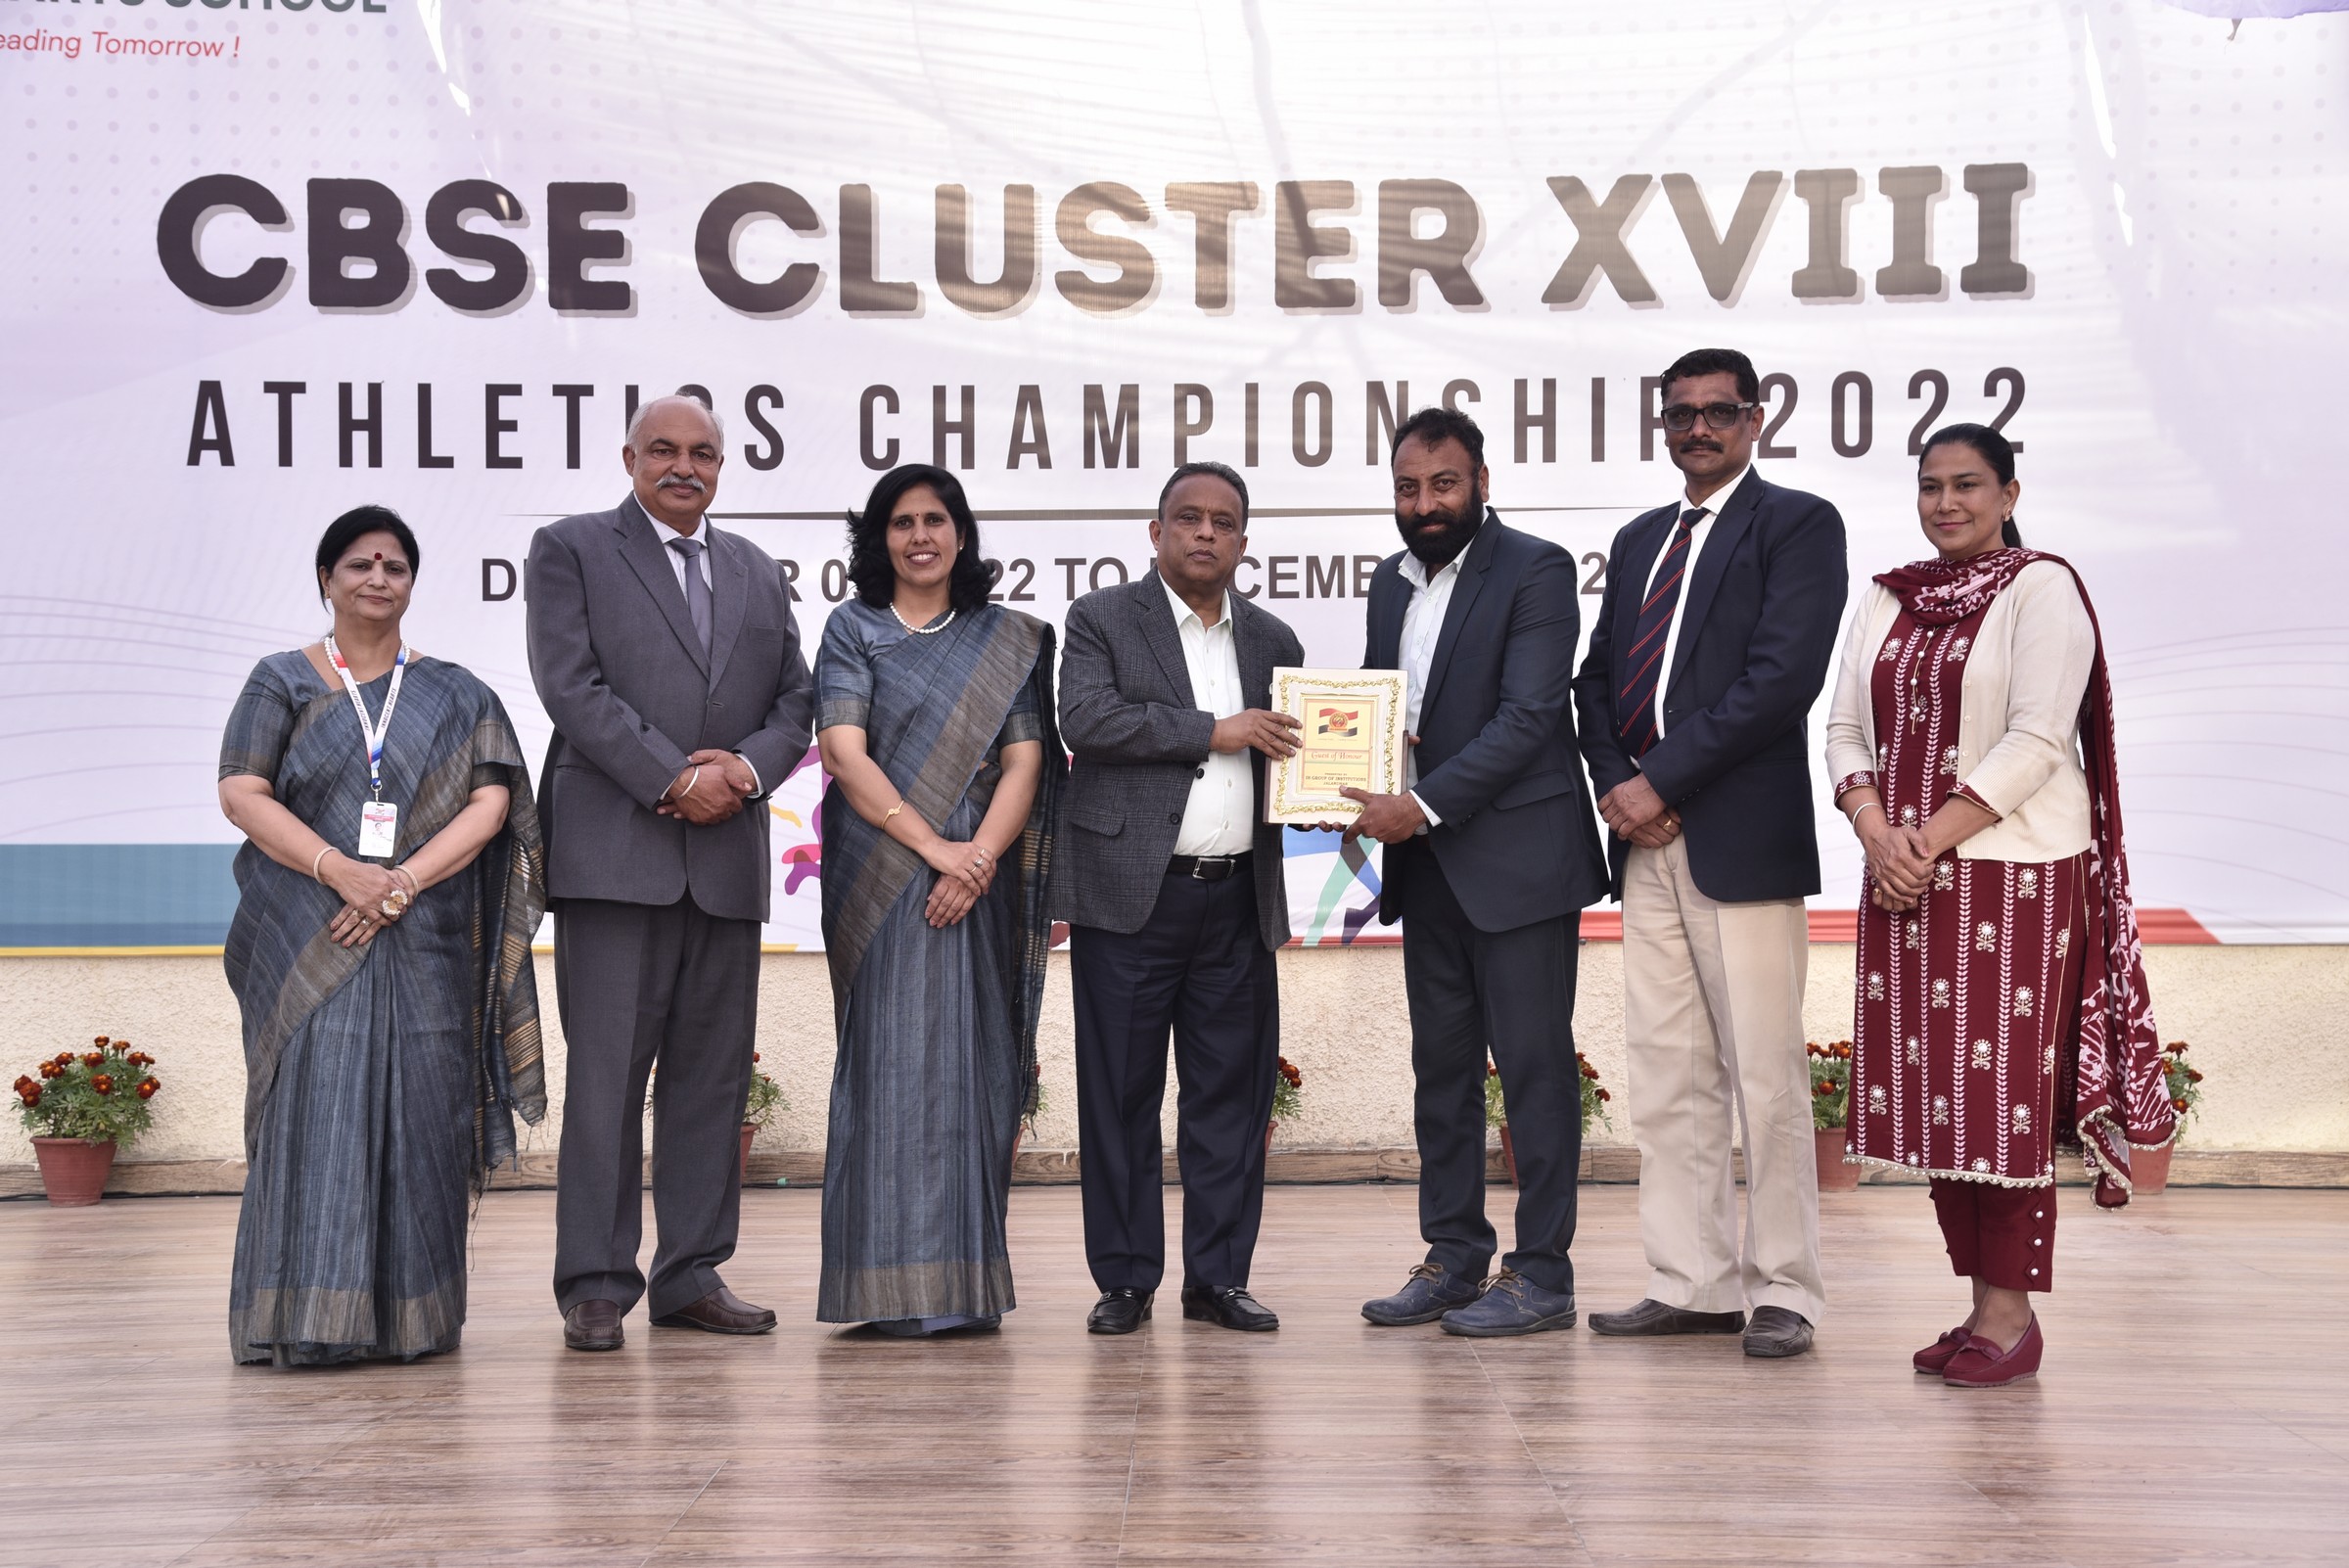 CBSE Cluster XVIII Athletic Meet 2022 concludes at Innocent Hearts, Khalsa Academy Mehta, Amritsar won the overall trophy